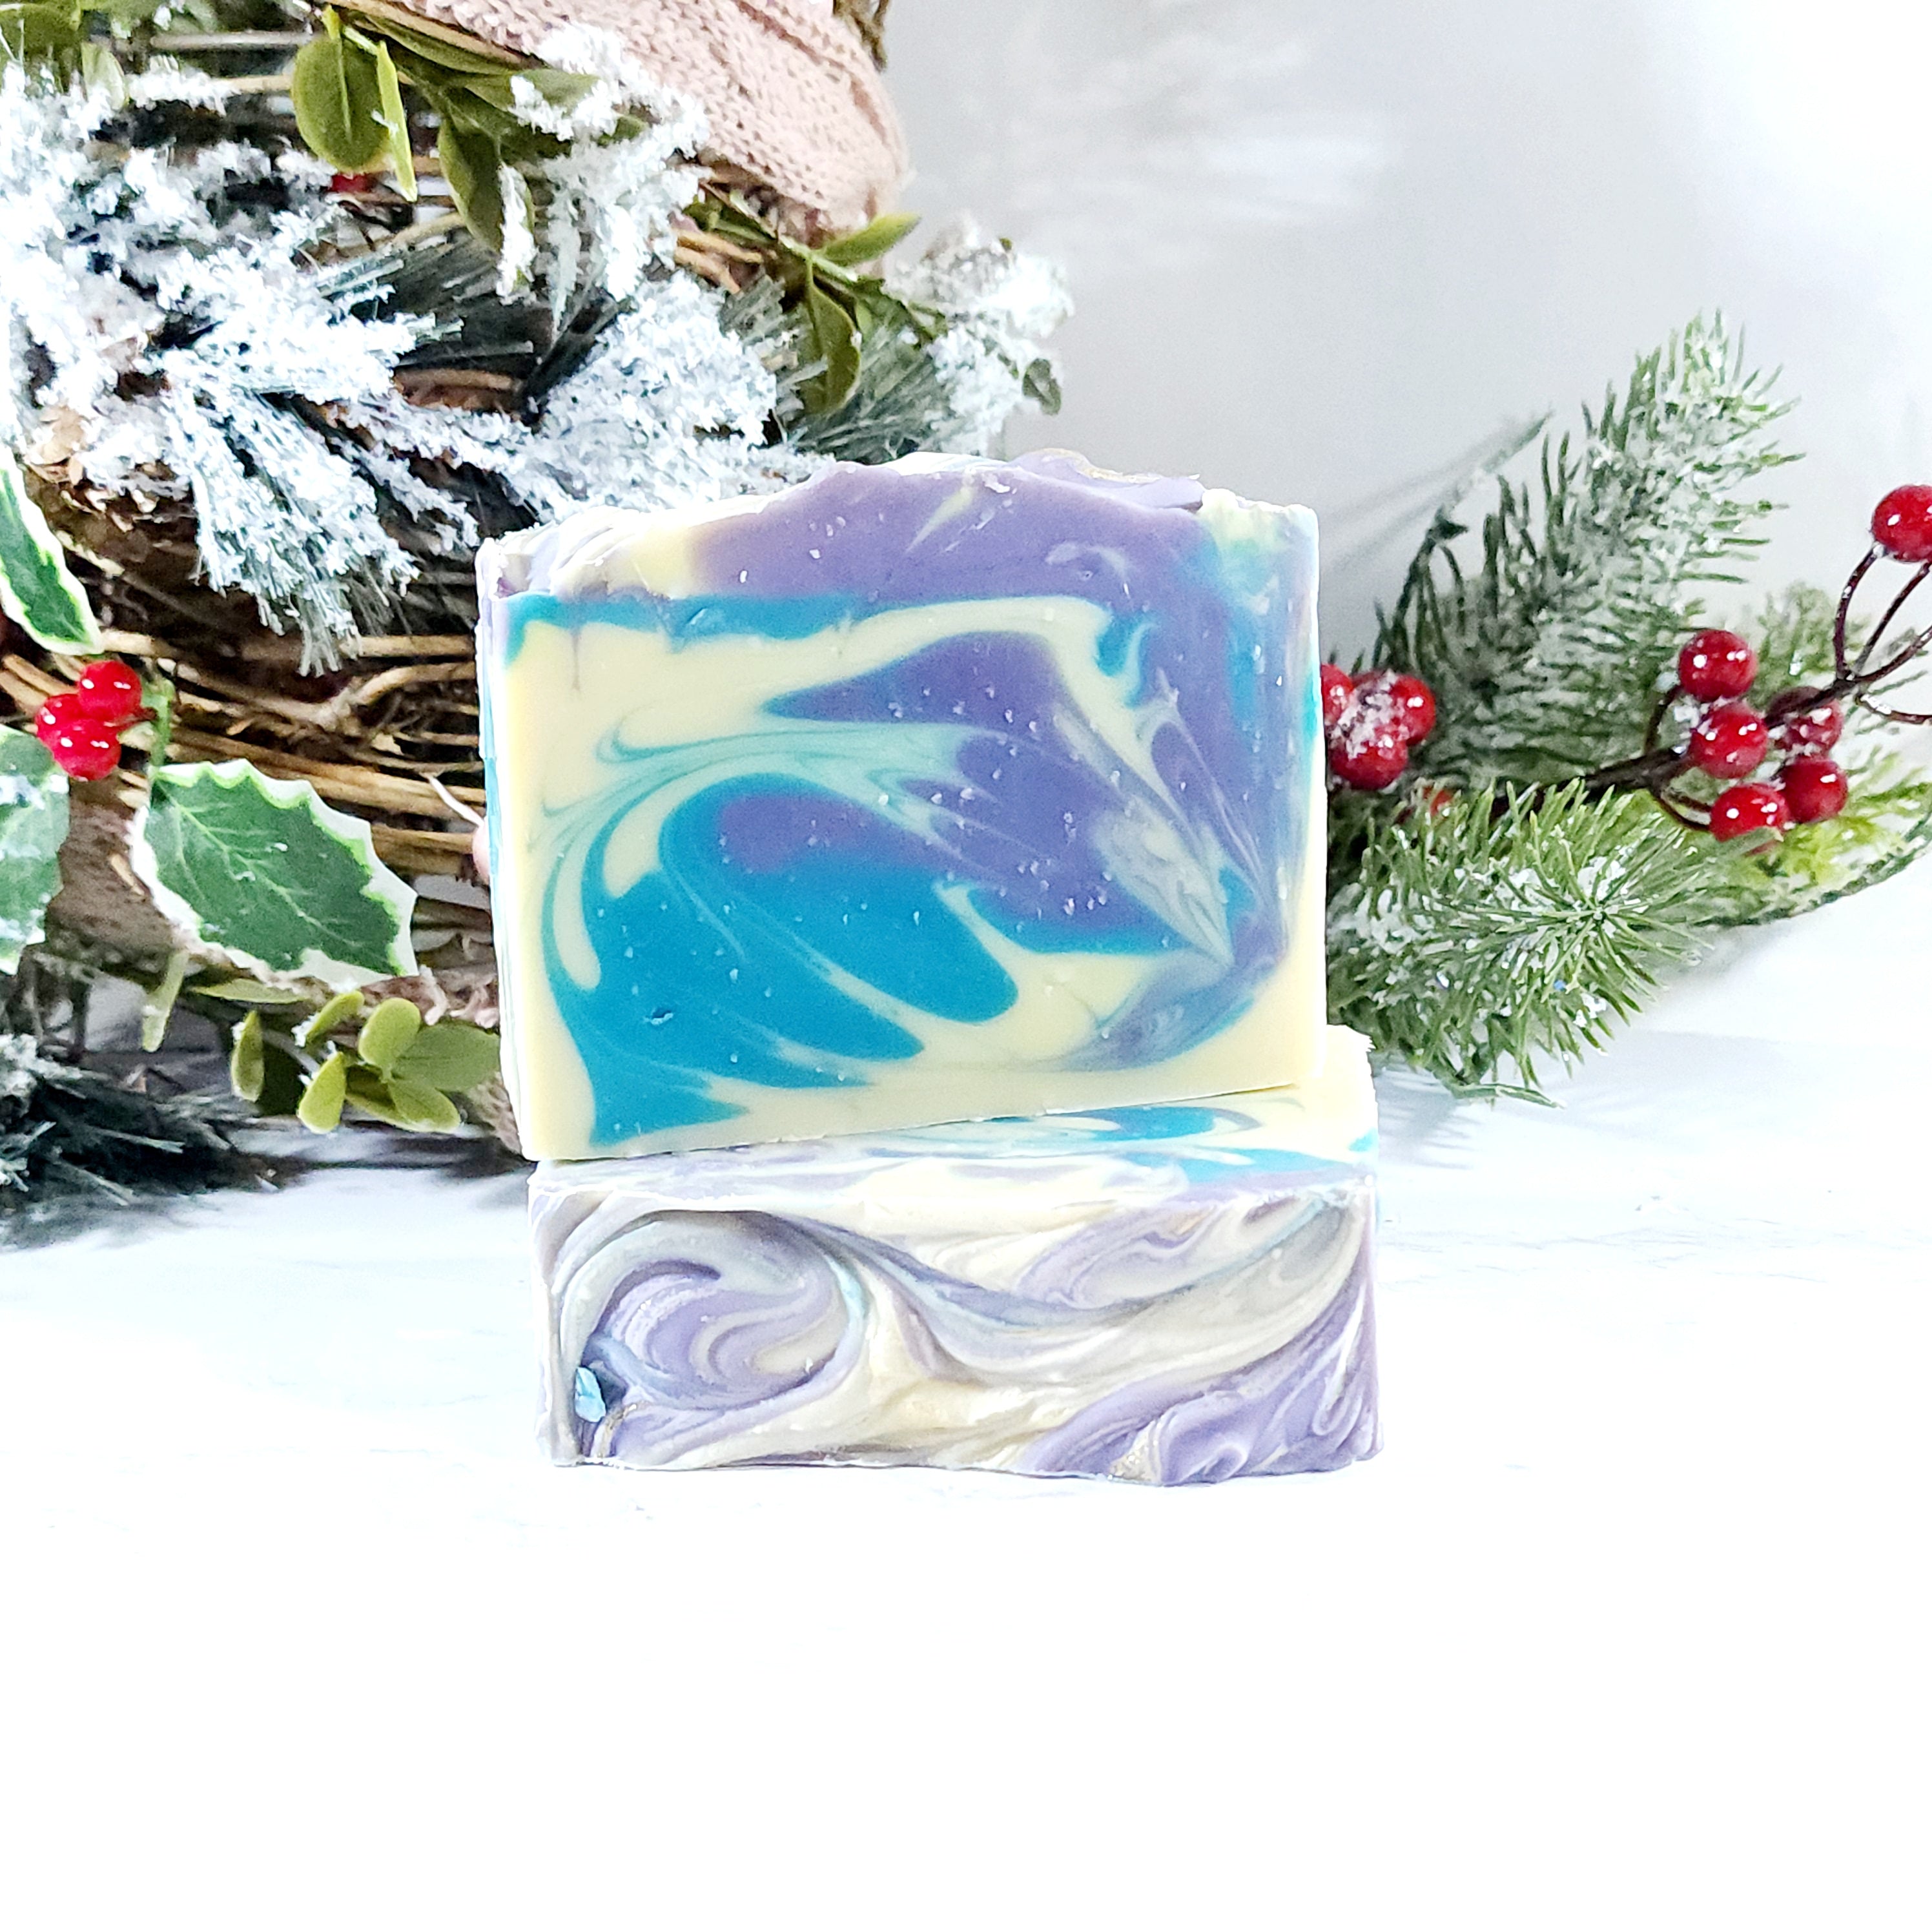 Cozy Vibes Soap Bar Diana's Candles and Soaps